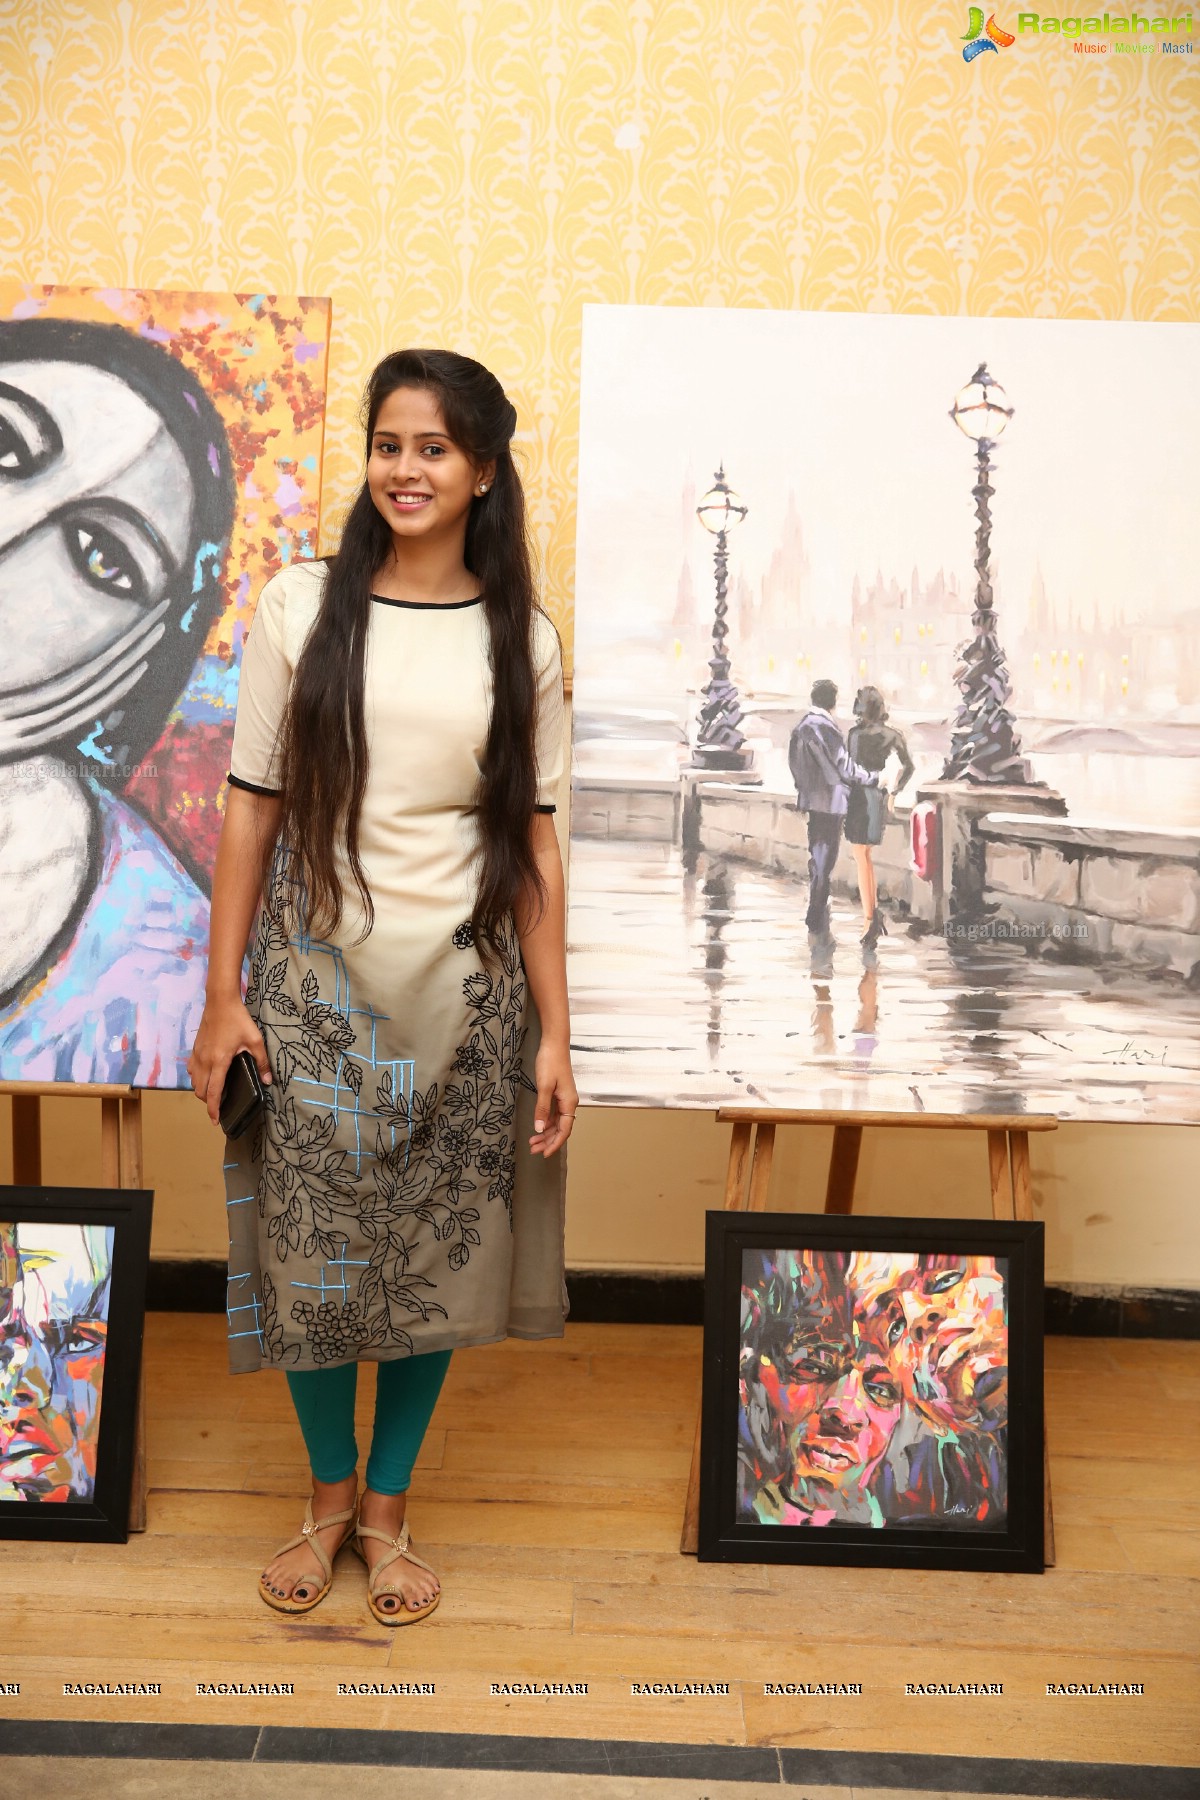 Perseverance - A Charity Art Show - 75th Solo Exhibition Of Paintings By Hari